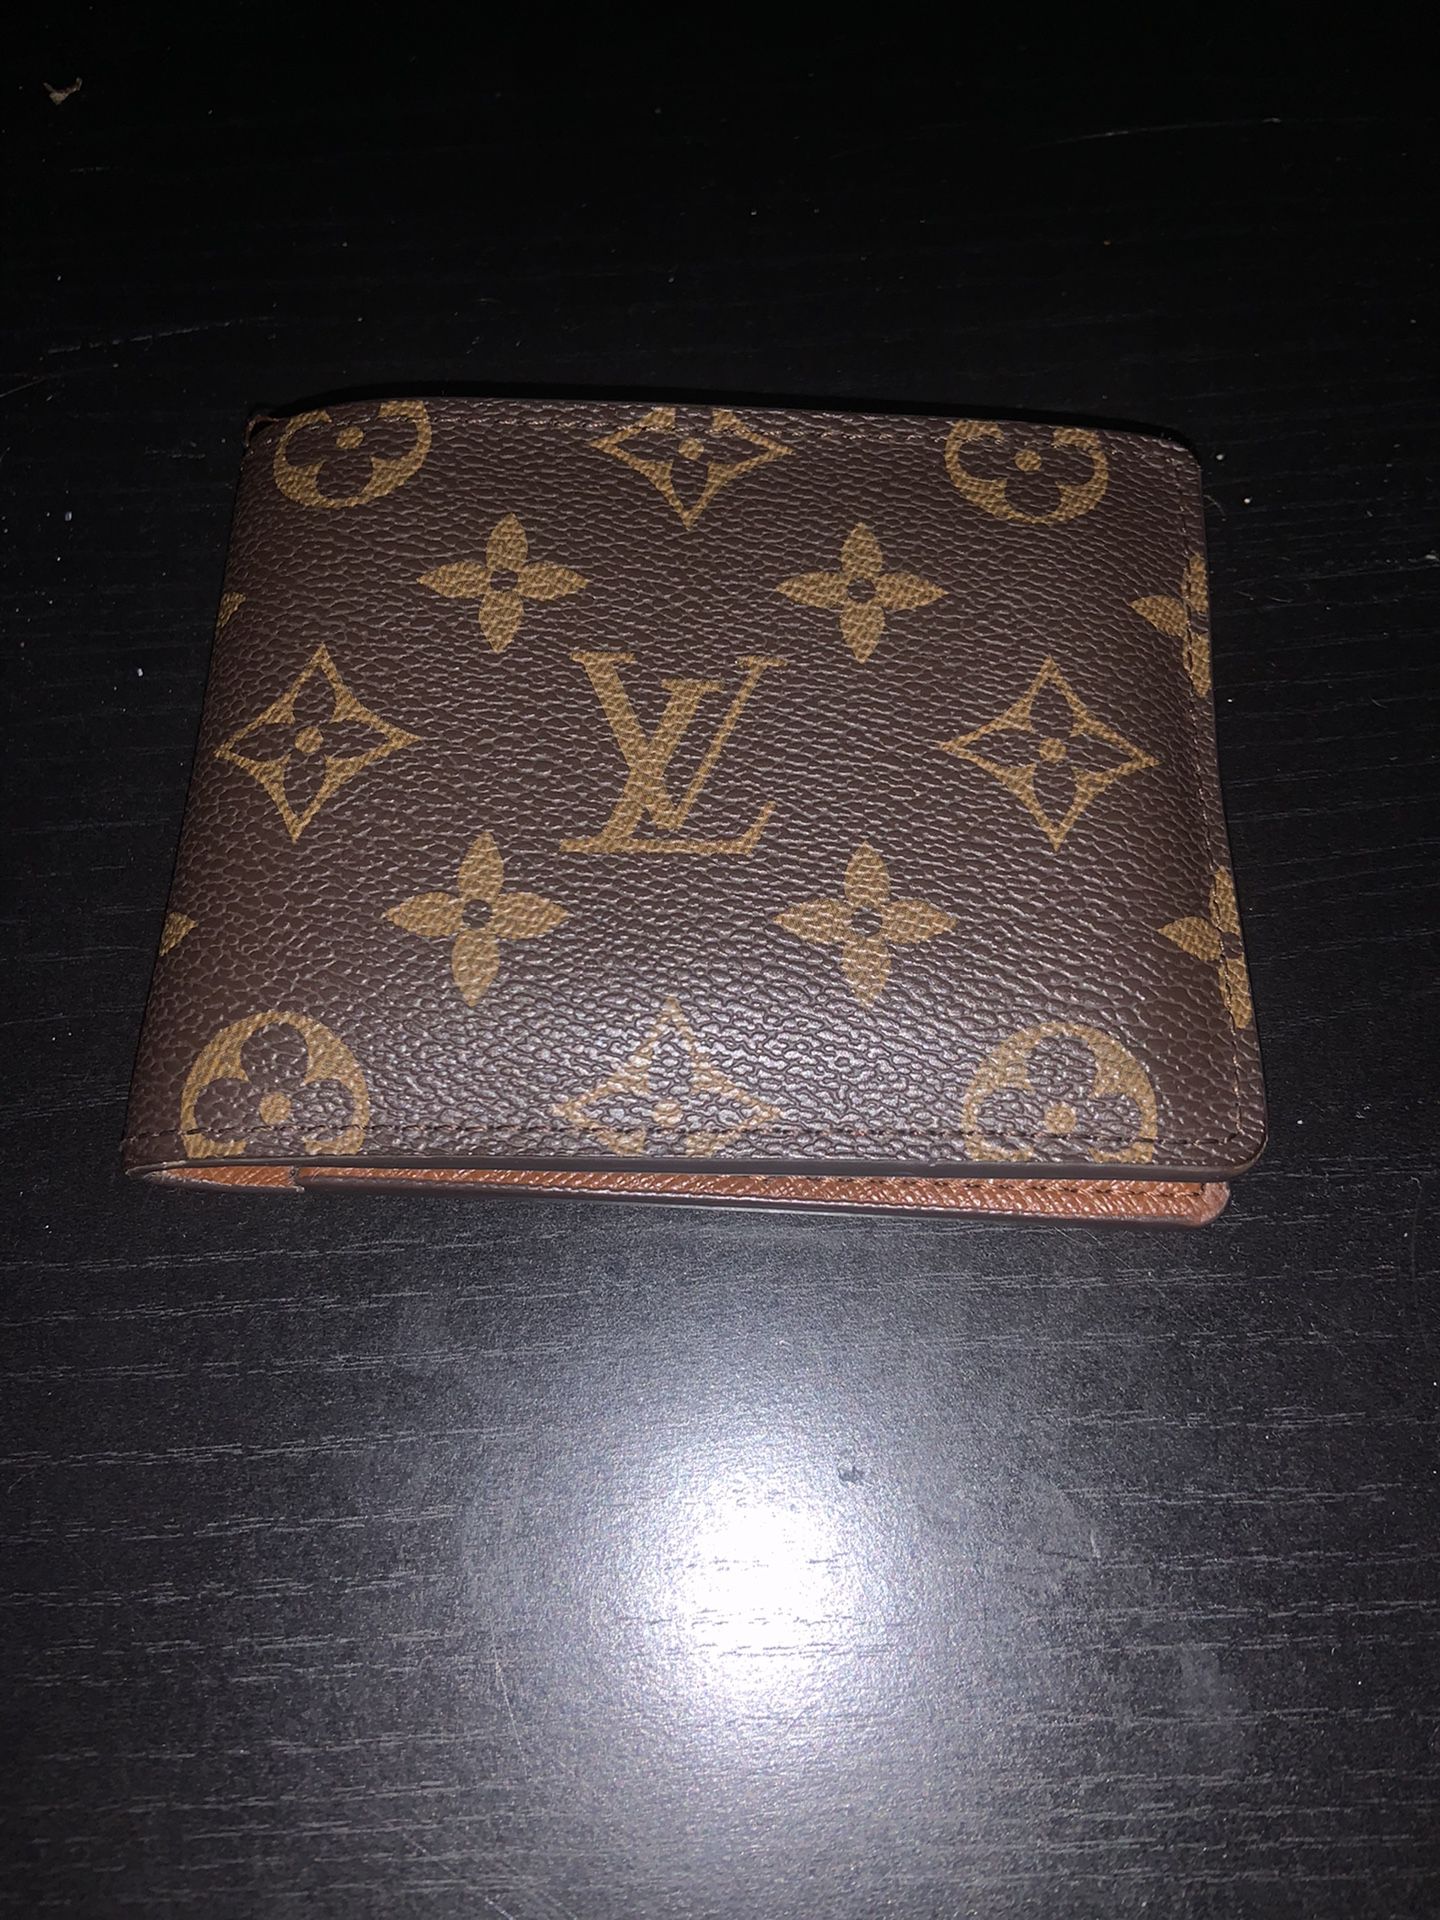 VERY LIGHTLY Used LV Wallet for Sale in Miami, FL - OfferUp